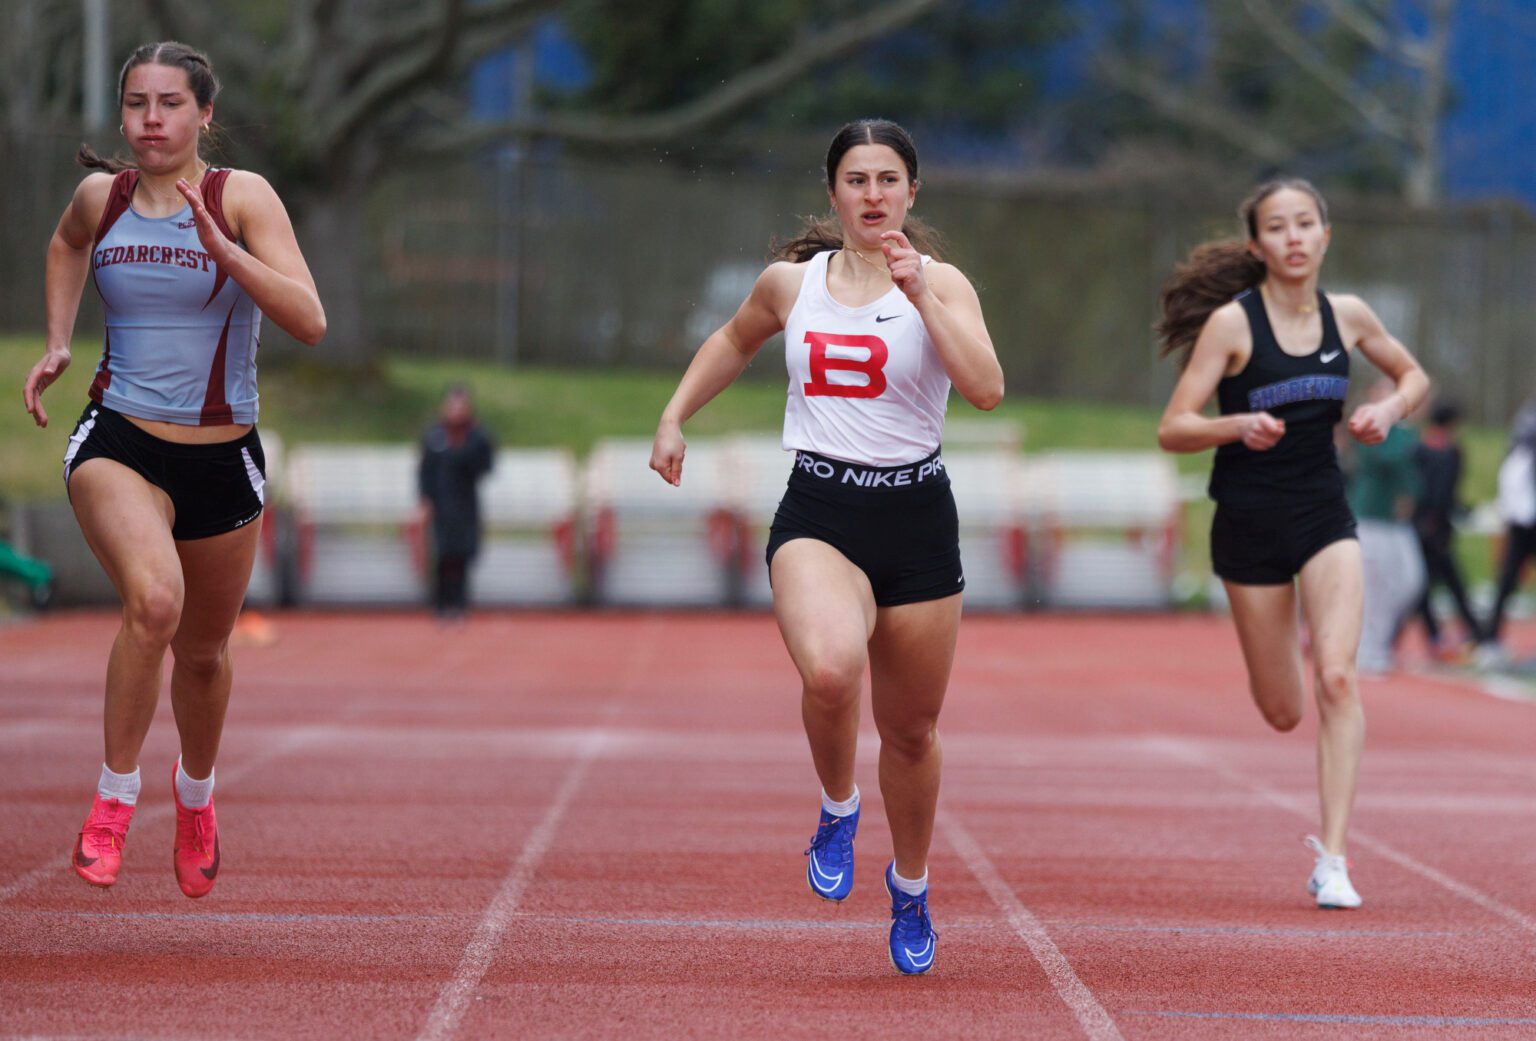 Bellingham's Sofia Calabretta looks over at the timer Saturday, April 6 as she crosses the finish line of the 200-meter dash during the Birger Solberg Invitational at Civic Stadium.